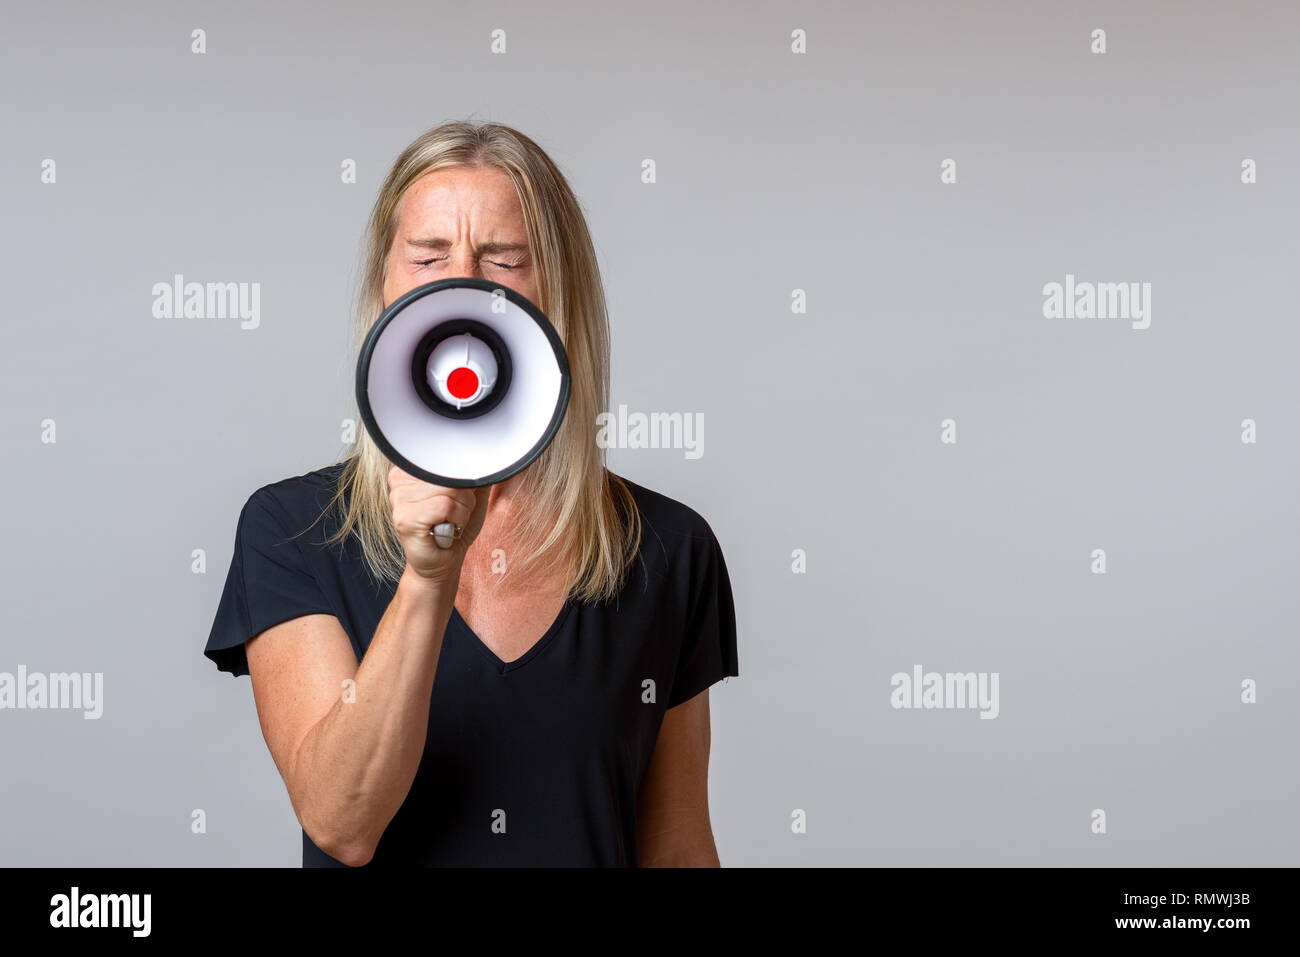 Angry woman yelling into a handheld megaphone in a concept of activism, strike, demonstration, protest or public speaking over grey with copy space Stock Photo